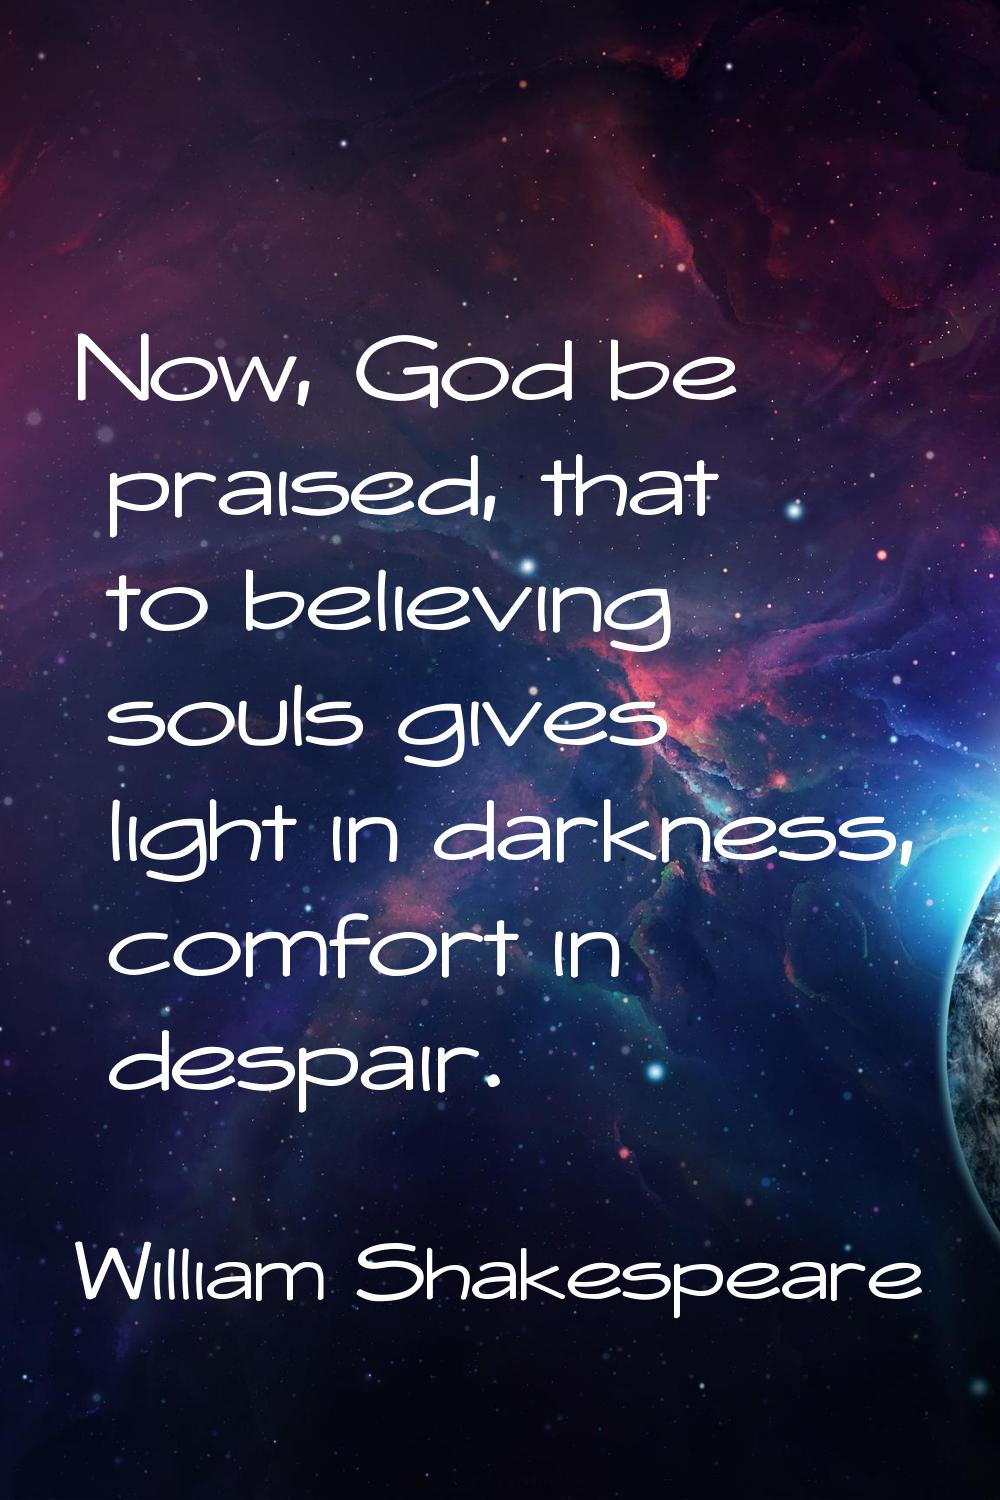 Now, God be praised, that to believing souls gives light in darkness, comfort in despair.